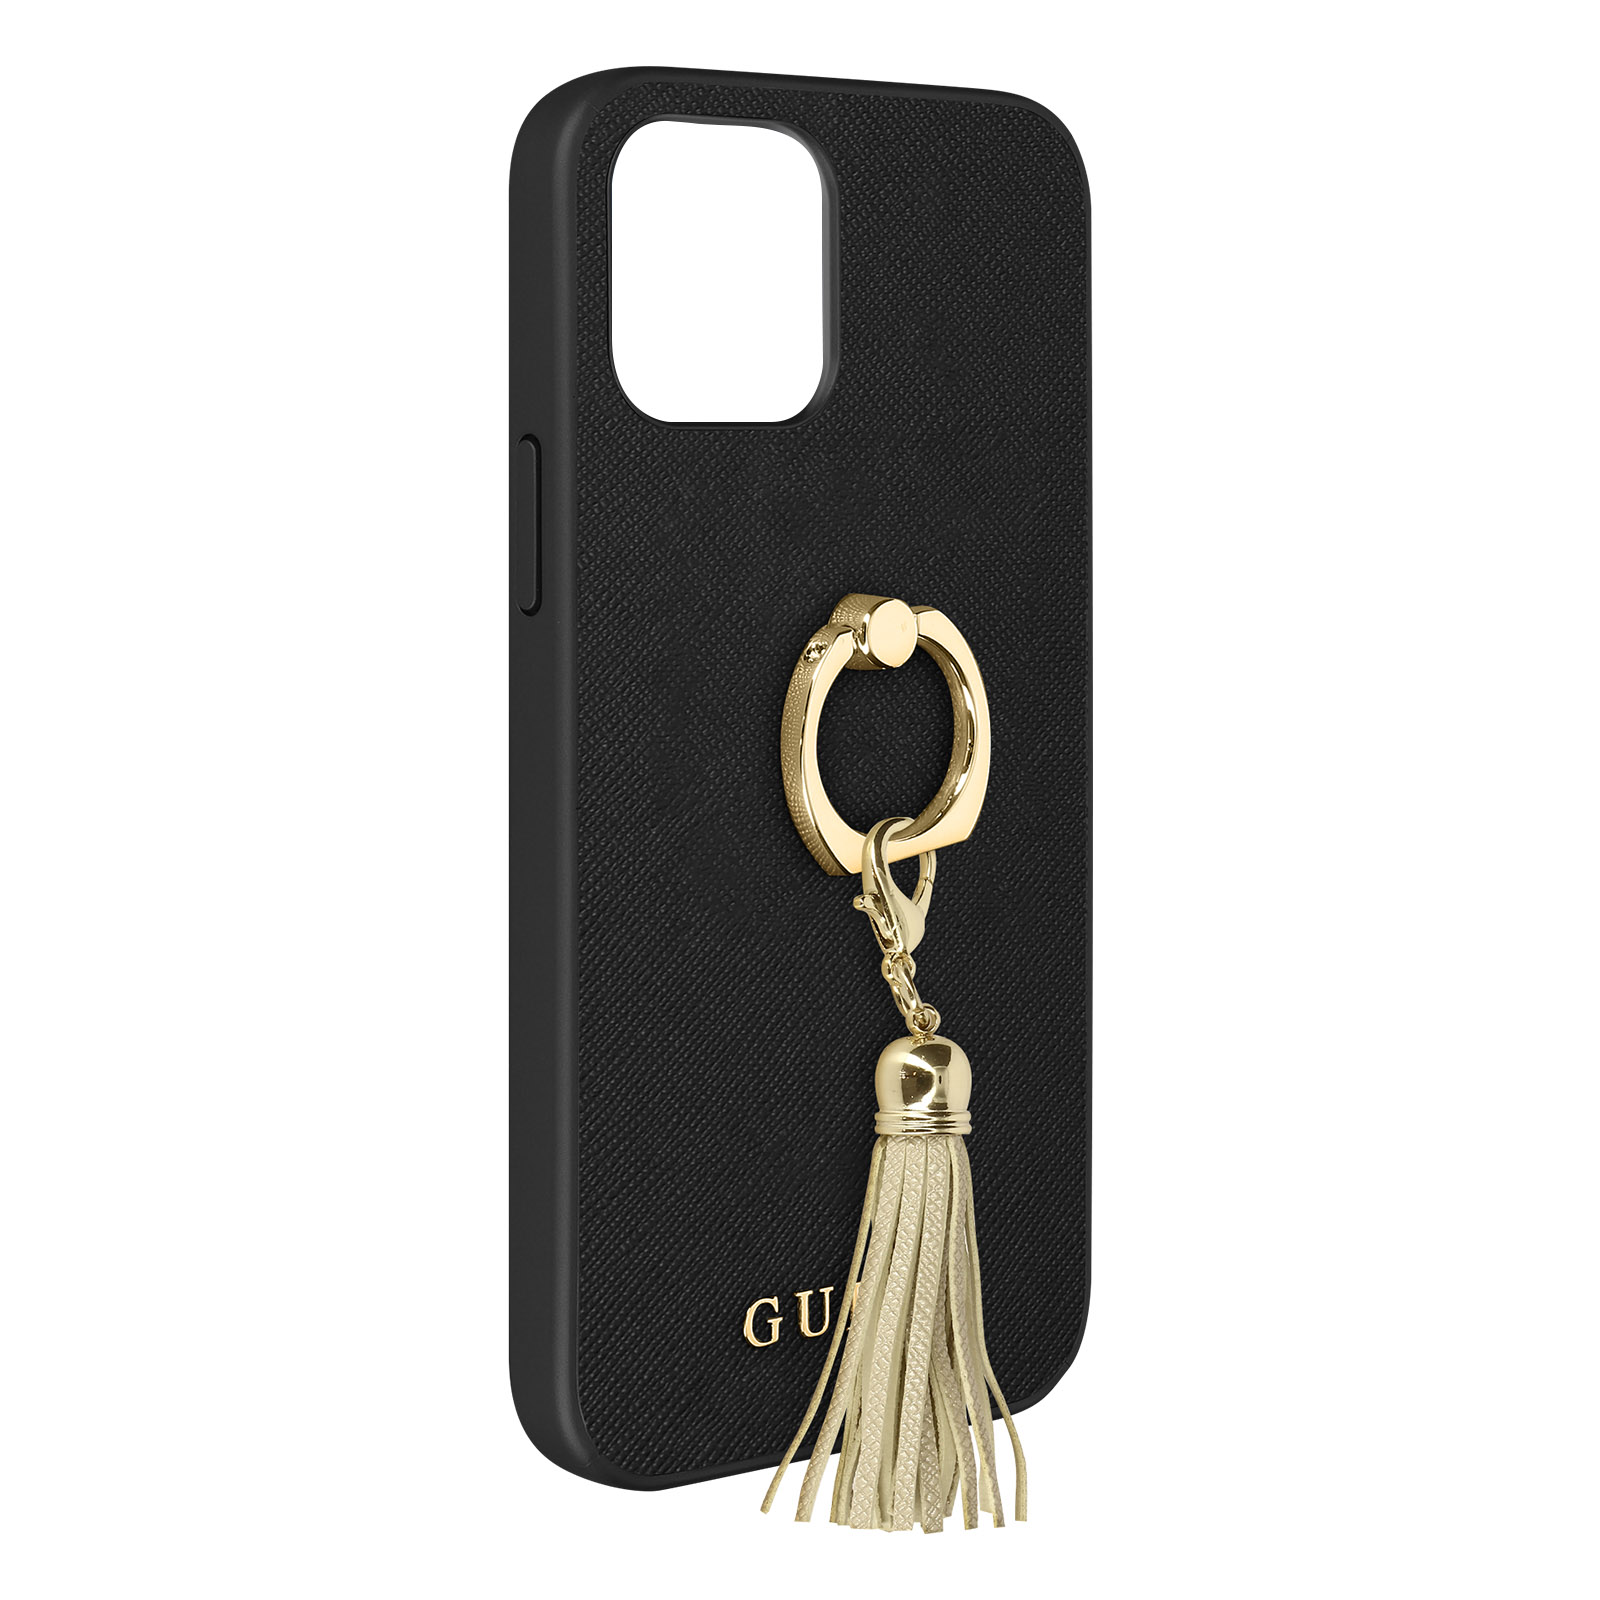 GUESS Backcover, Saffiano 12 Series, Pro, Schwarz Apple, iPhone